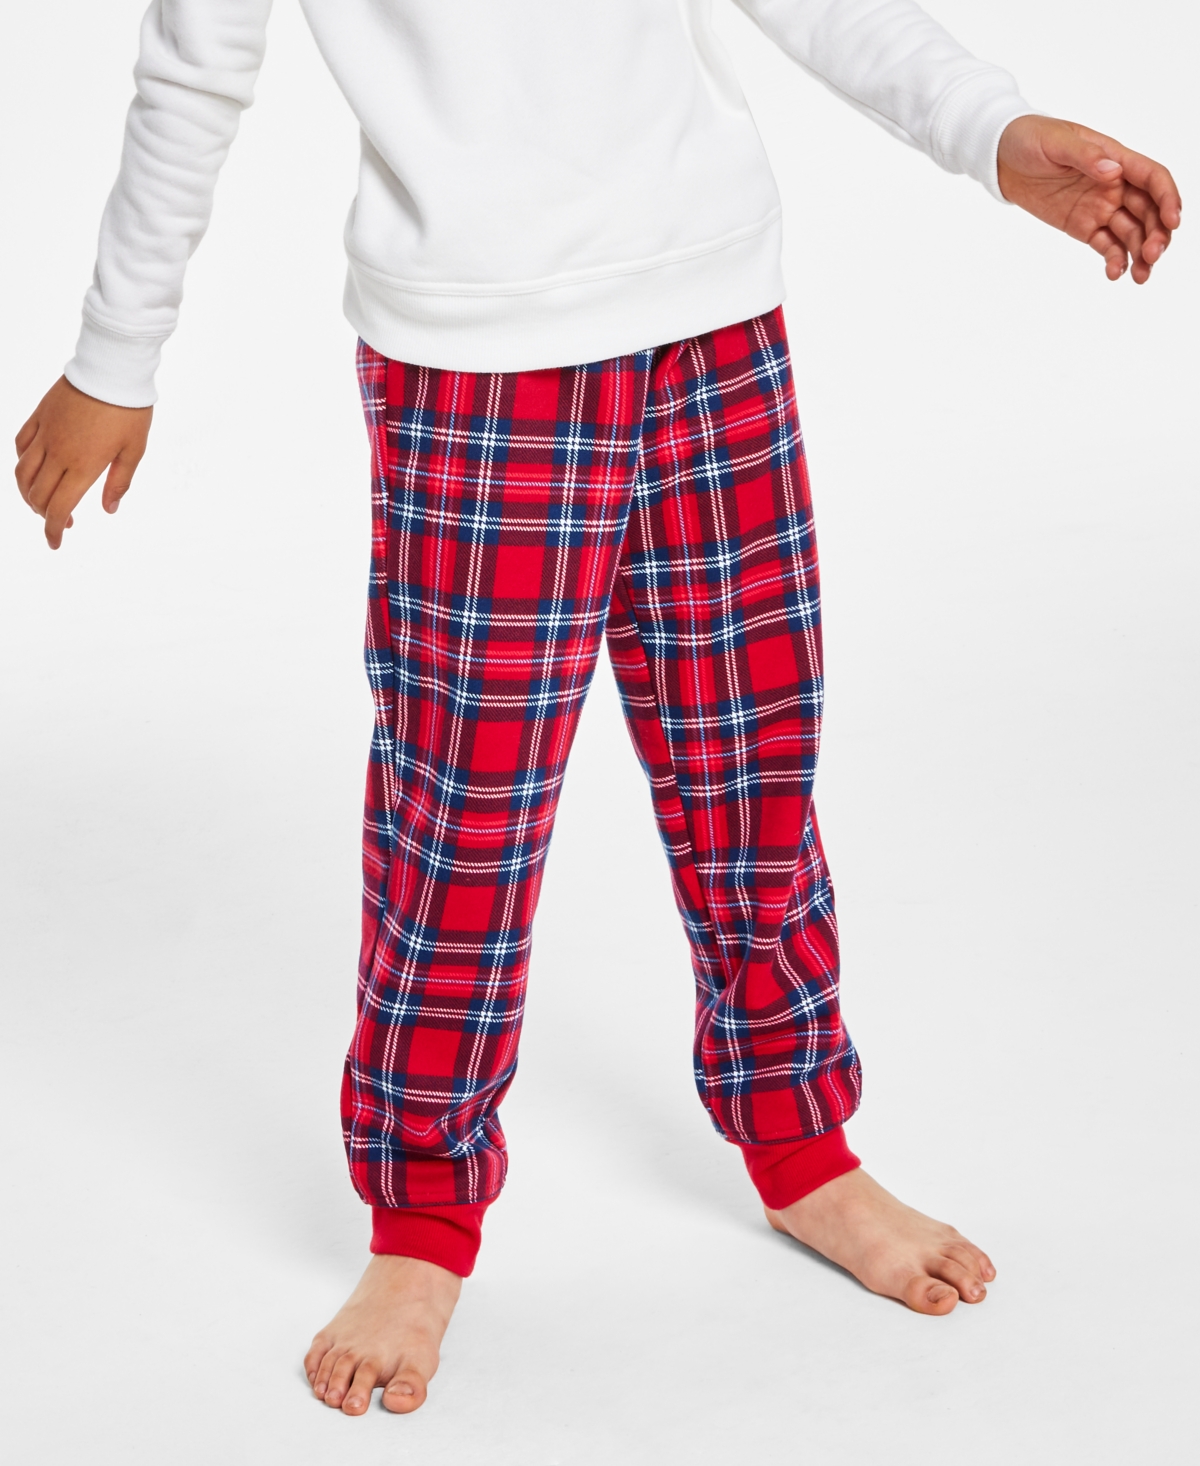 Charter Club Kids Printed Plaid Matching Jogger Pants, Created for Macy's